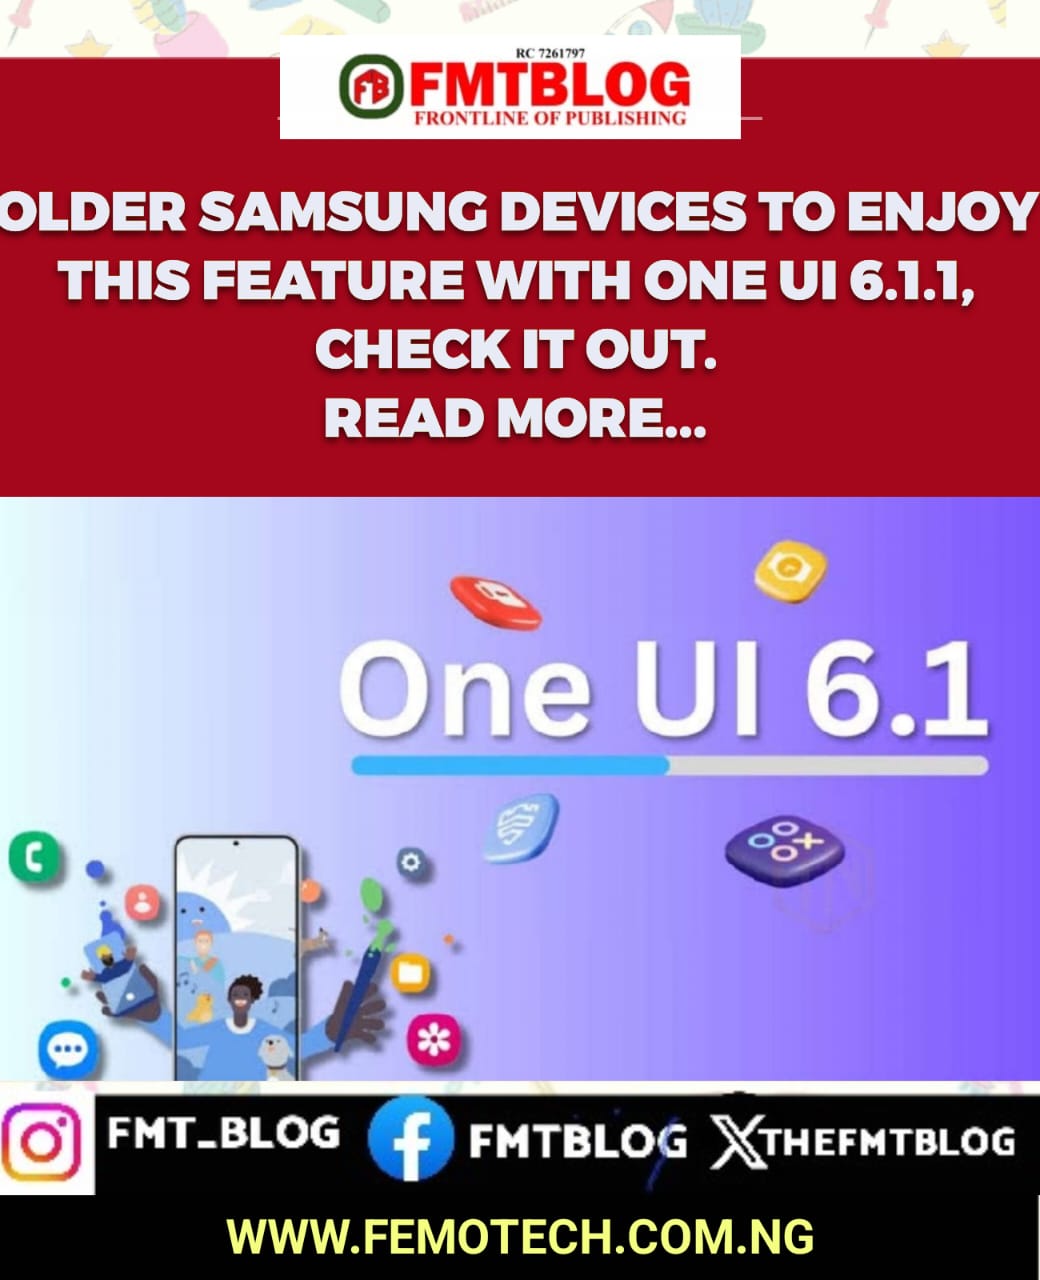 Older Samsung Devices To Enjoy This Feature With ONE UI 6.1.1, Check It Out